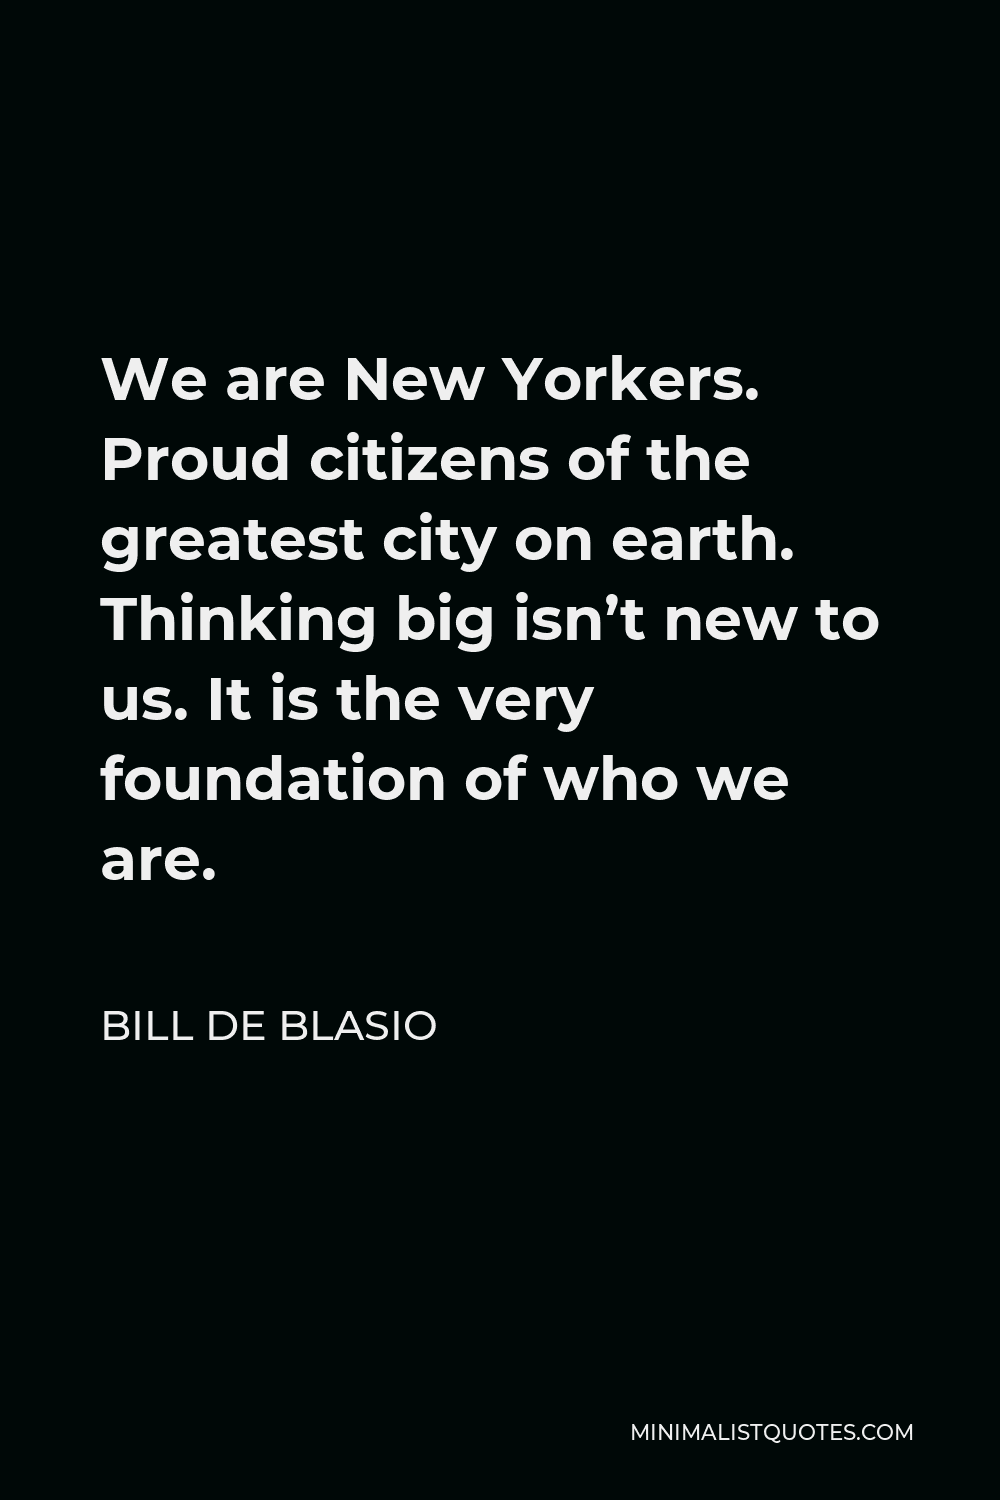 Bill de Blasio Quote - We are New Yorkers. Proud citizens of the greatest city on earth. Thinking big isn’t new to us. It is the very foundation of who we are.